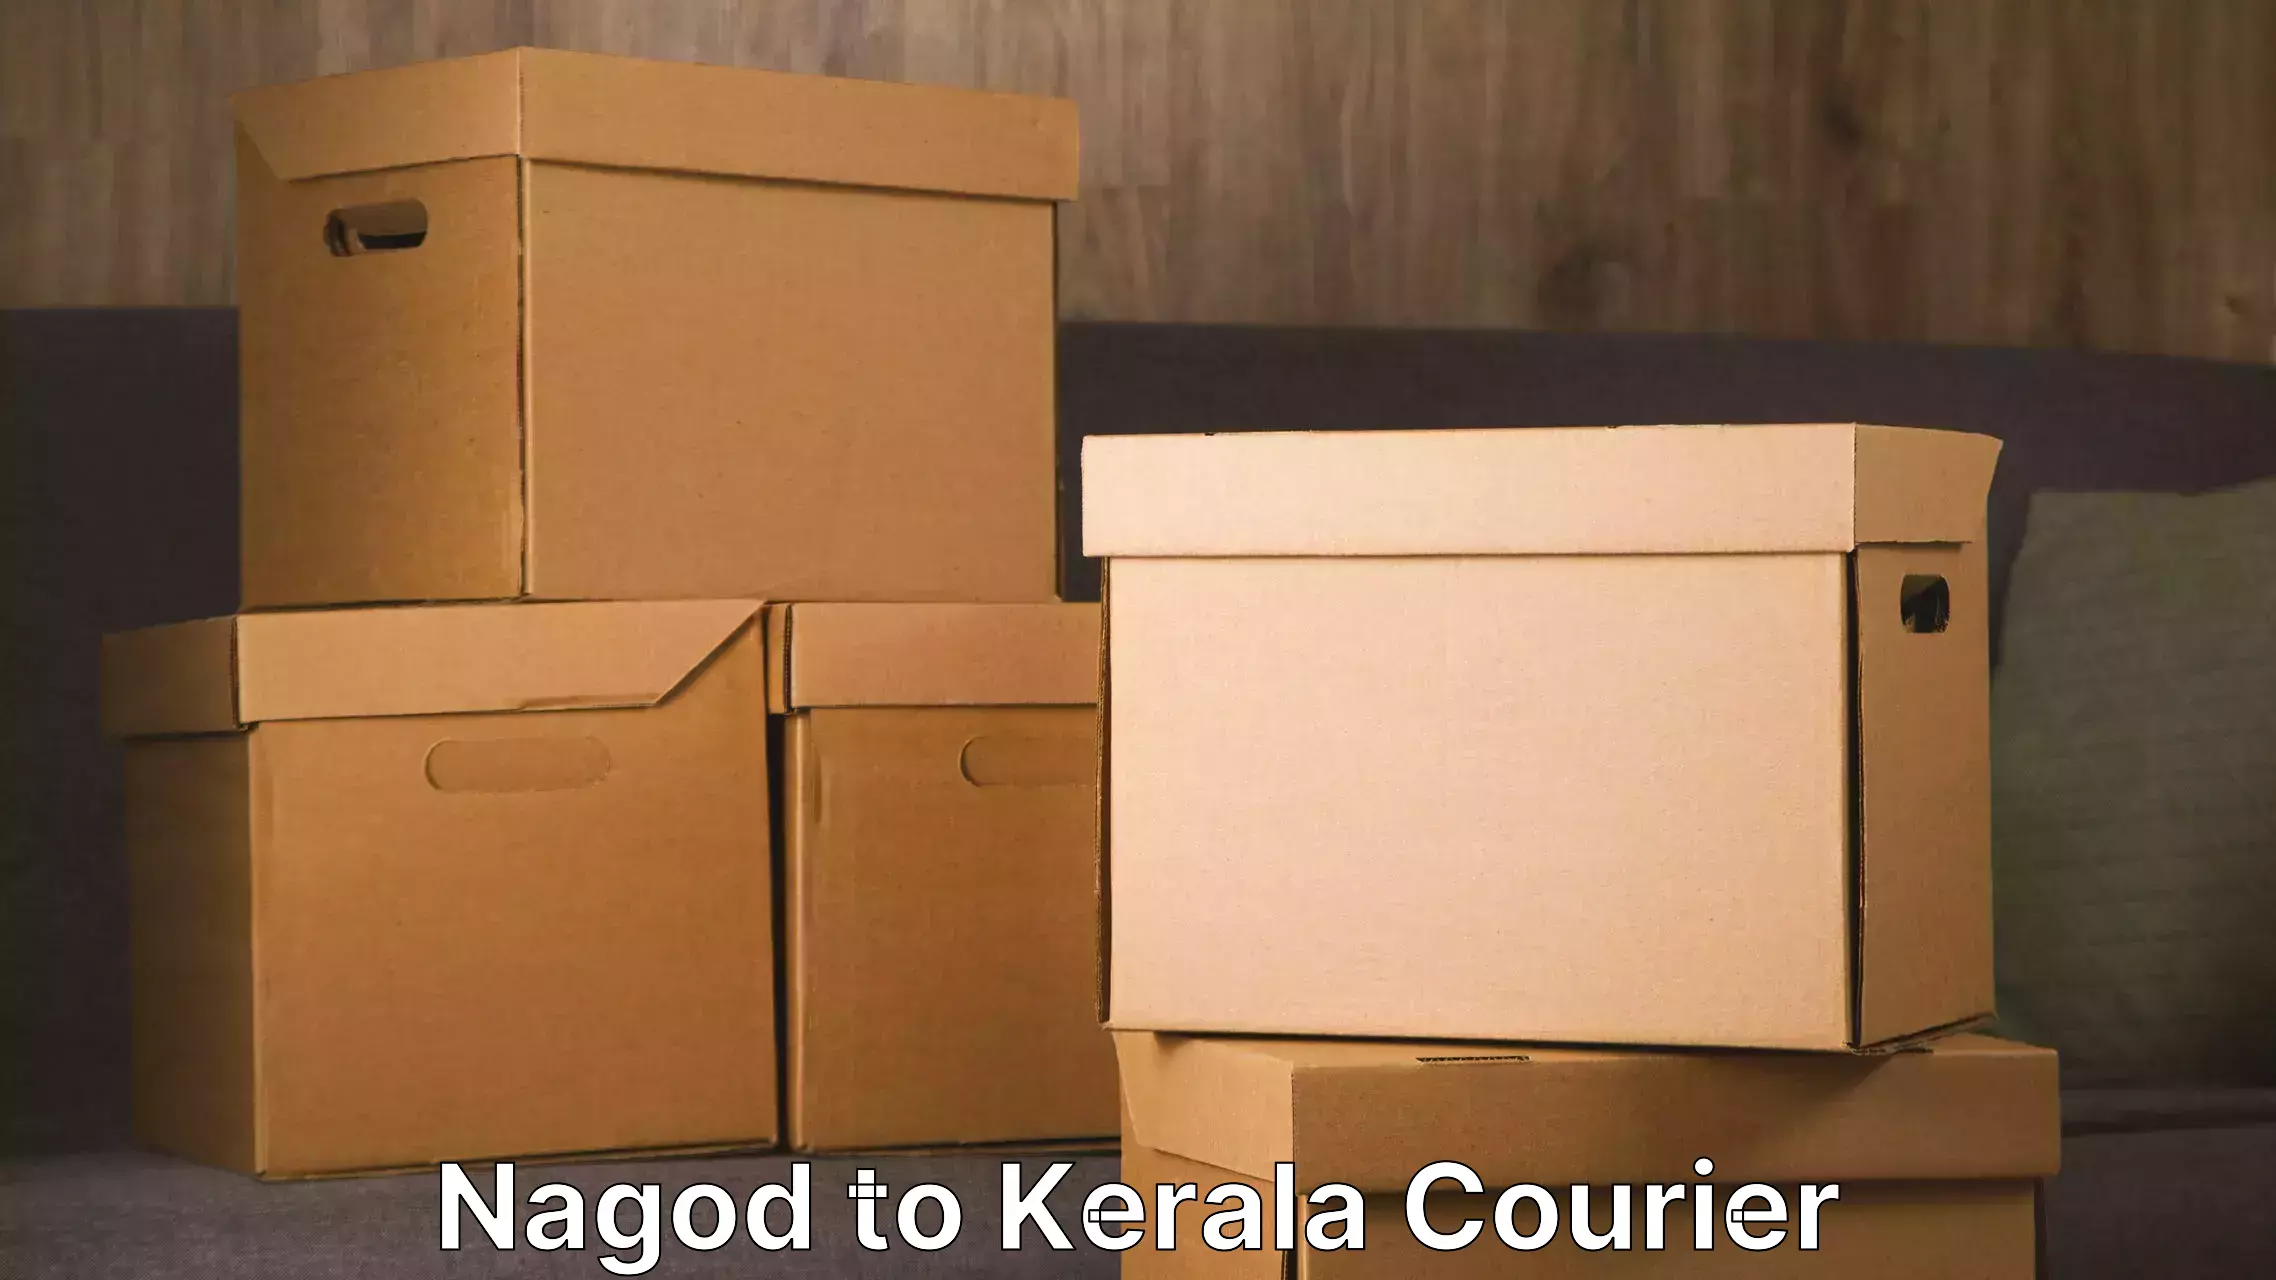 Trusted relocation experts Nagod to Kerala